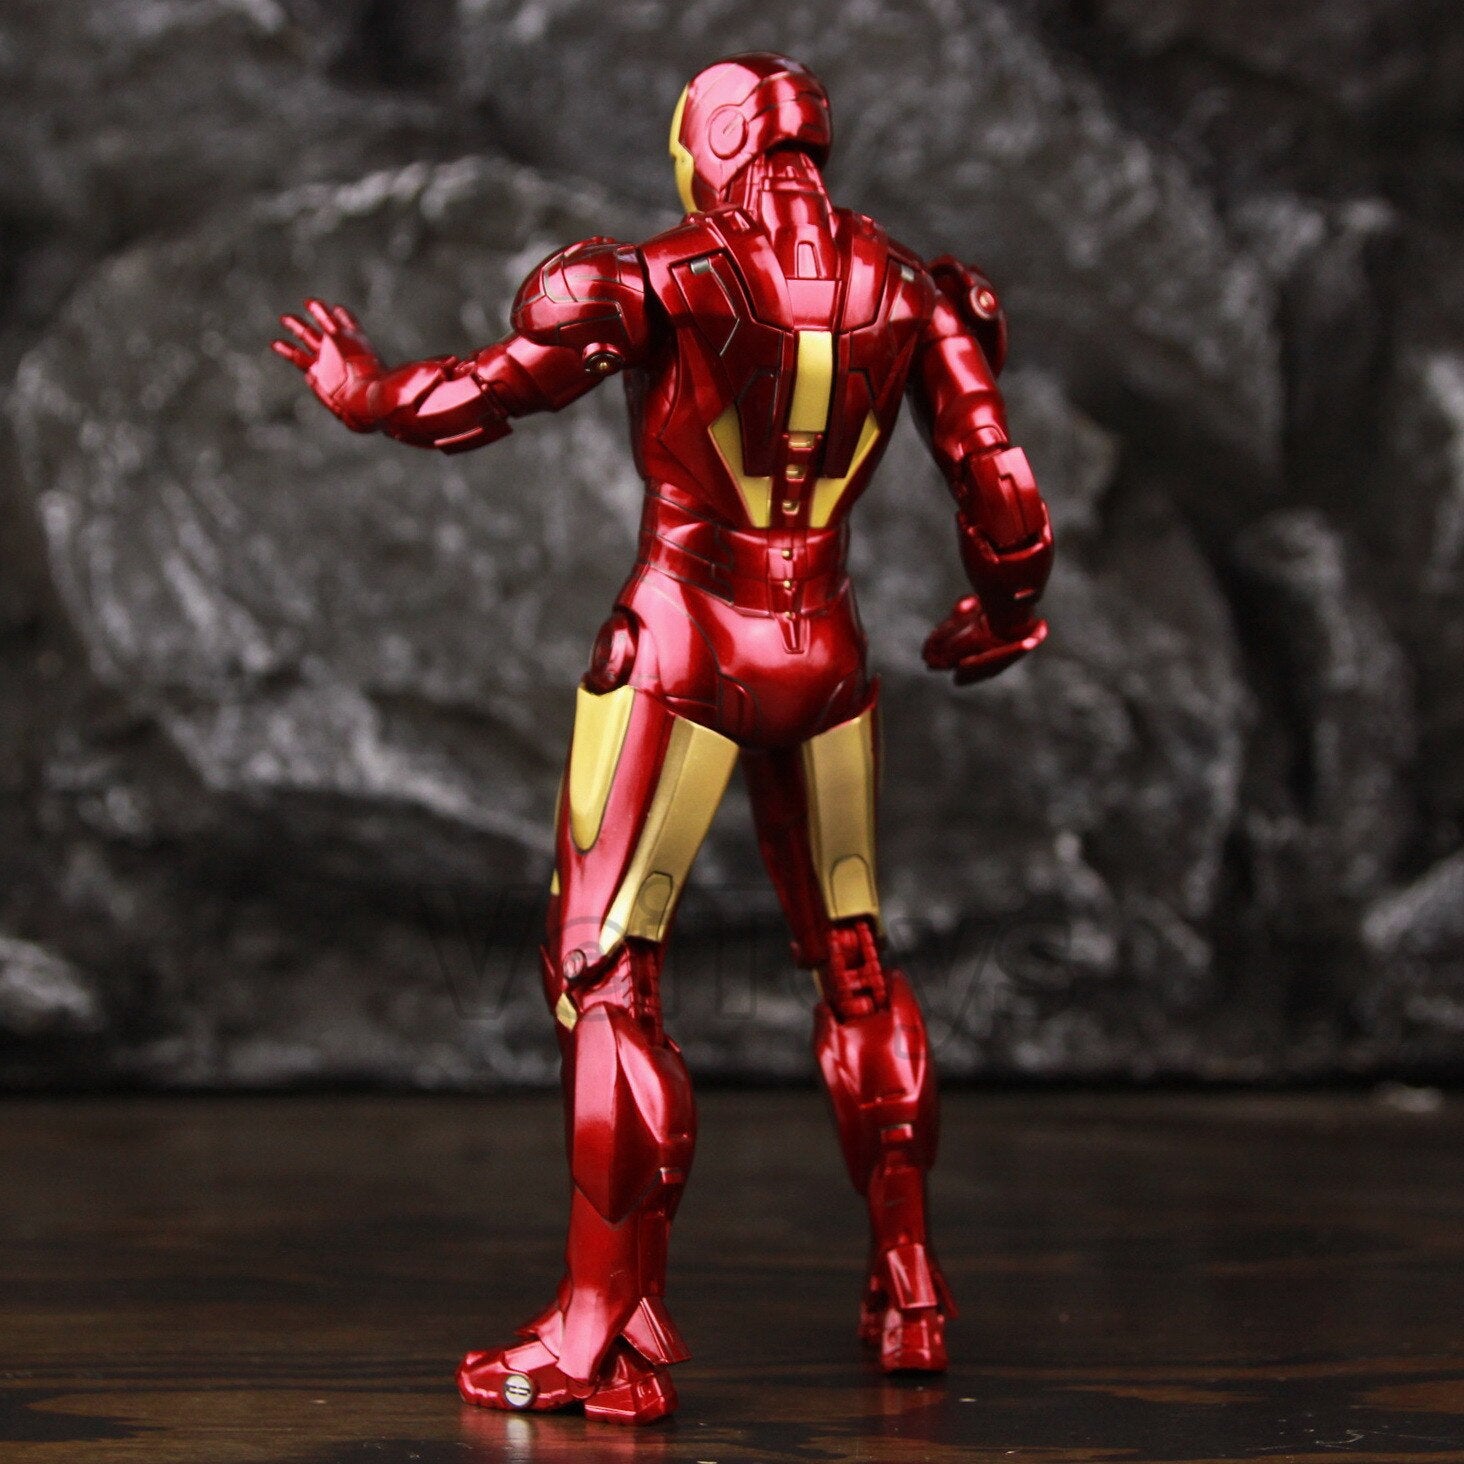 2020 Classic Marvel Iron Man MK4 Mark IV 7" Movie Action Figure - Xclusive Collectibles